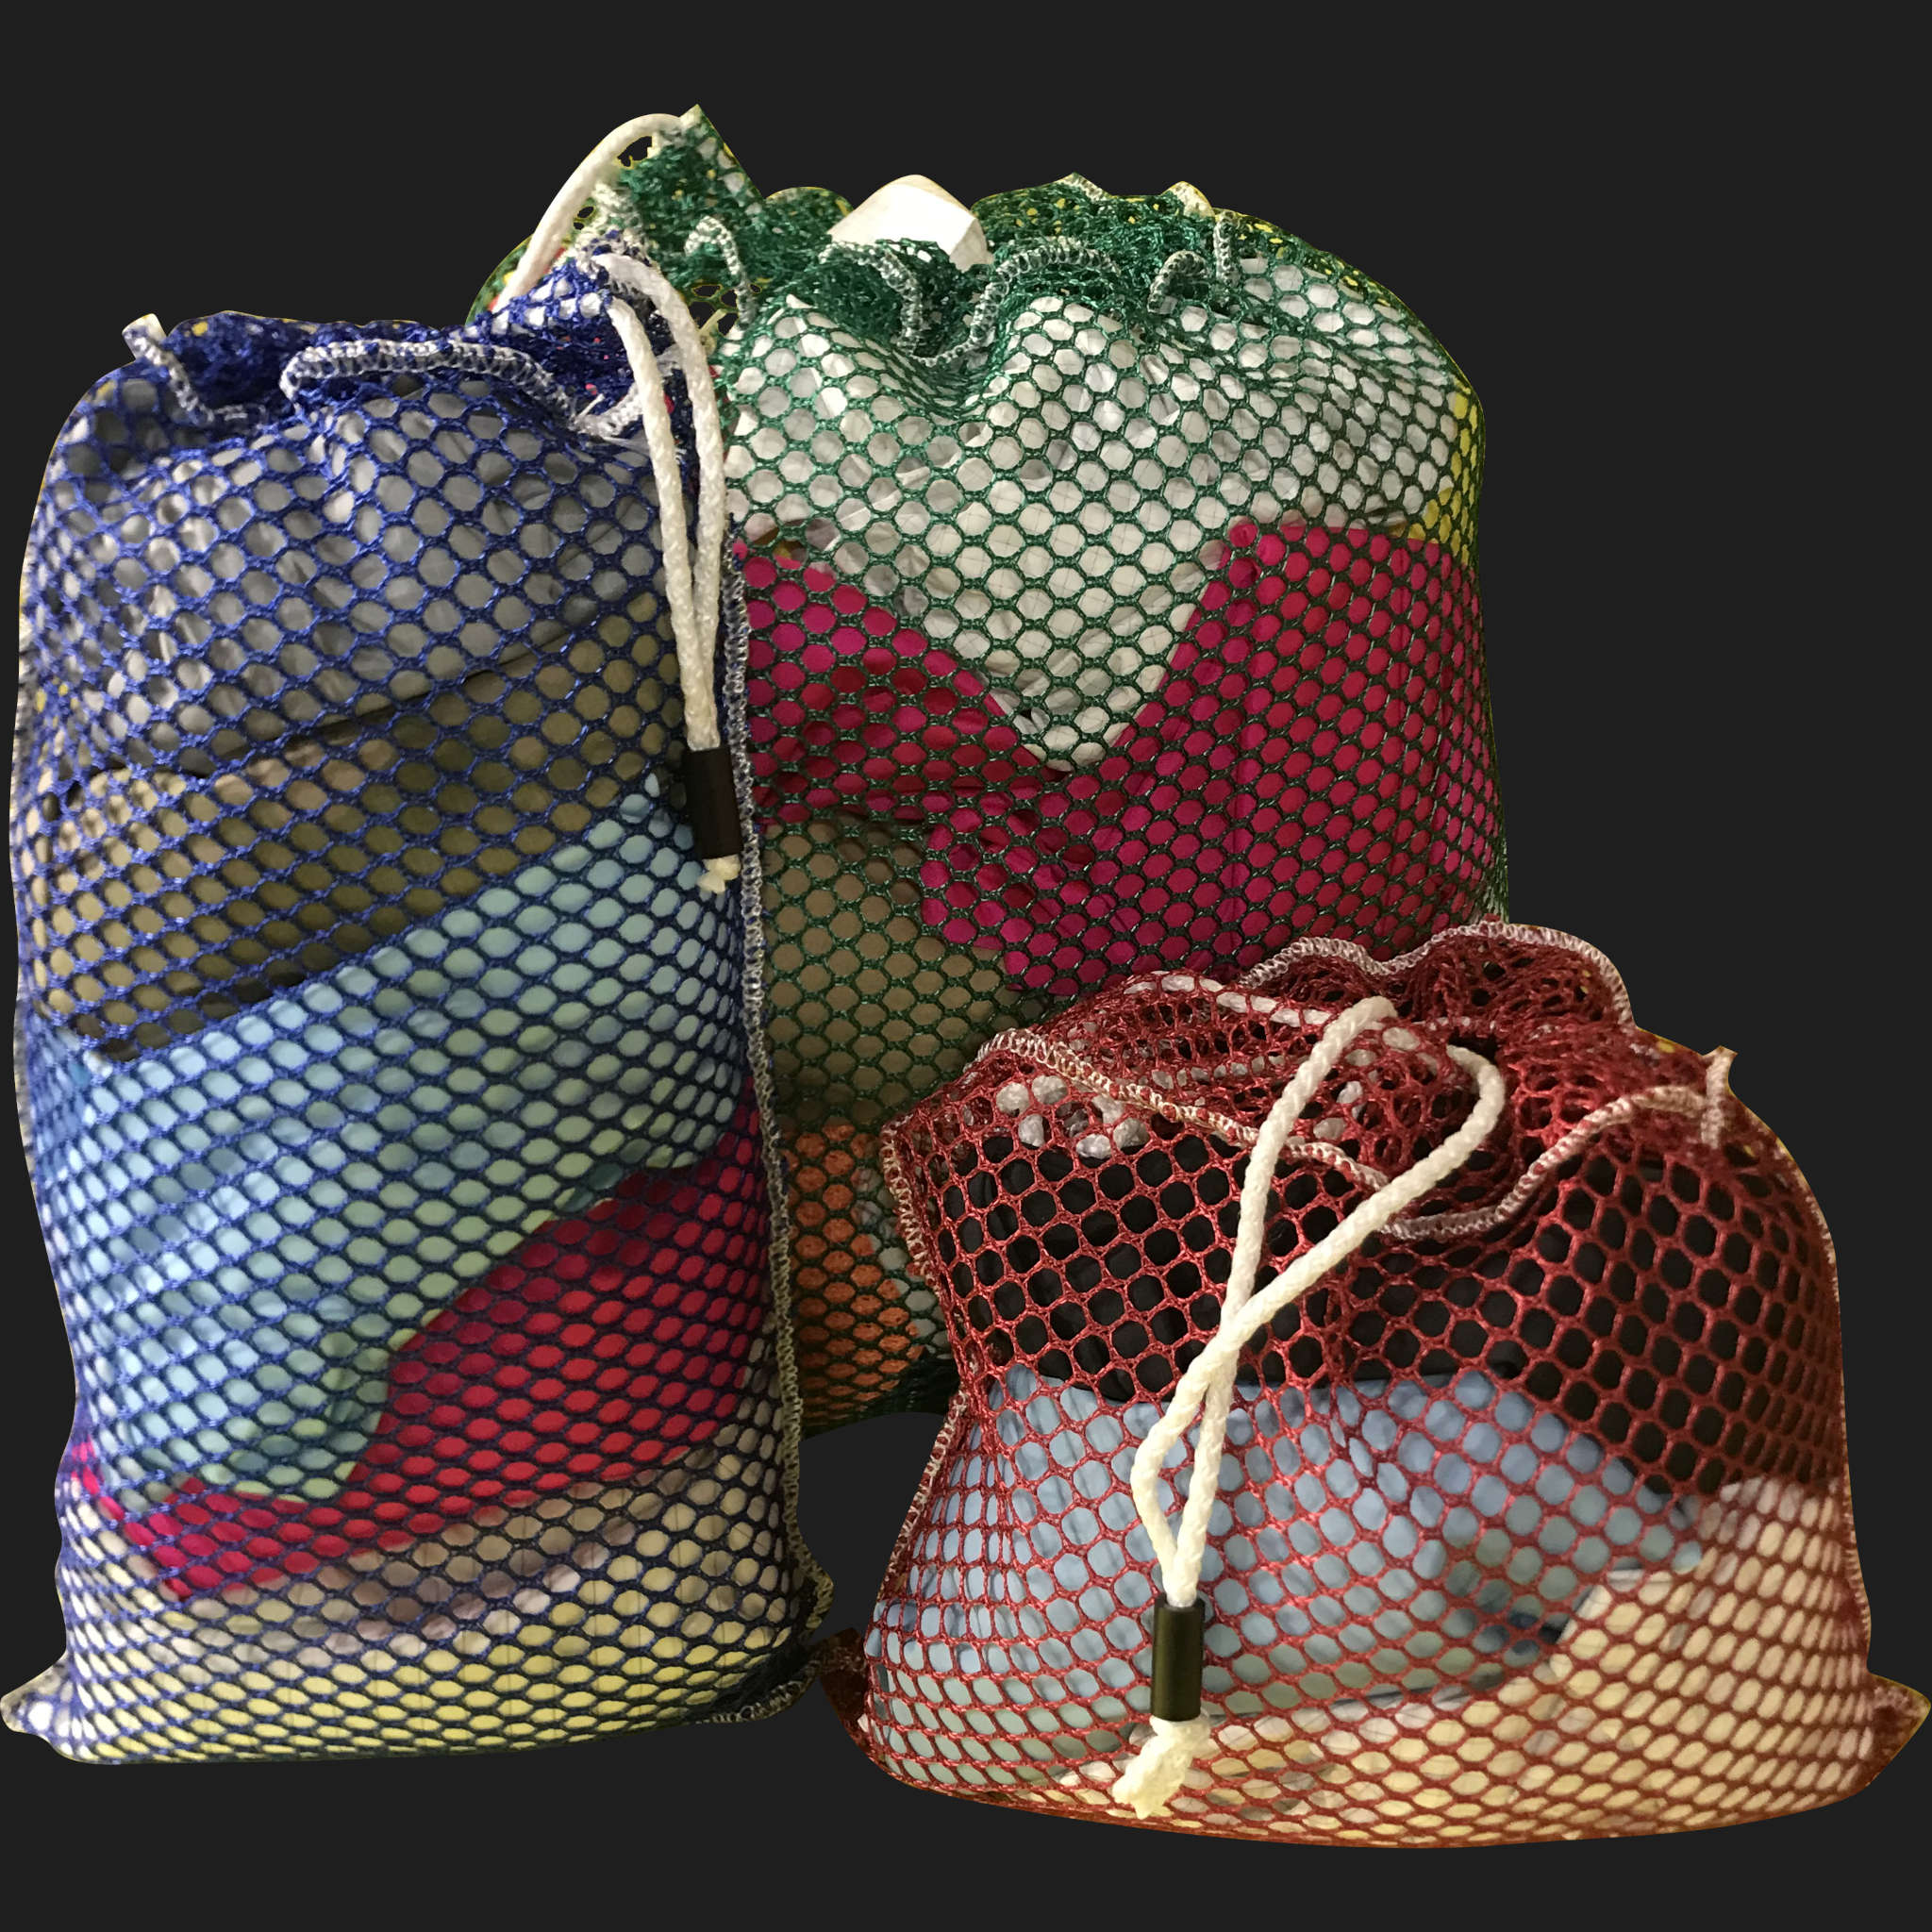 36" x 44" Customized Mesh-Net-Laundry Bags Heavy Duty with Cord and barrellock closure